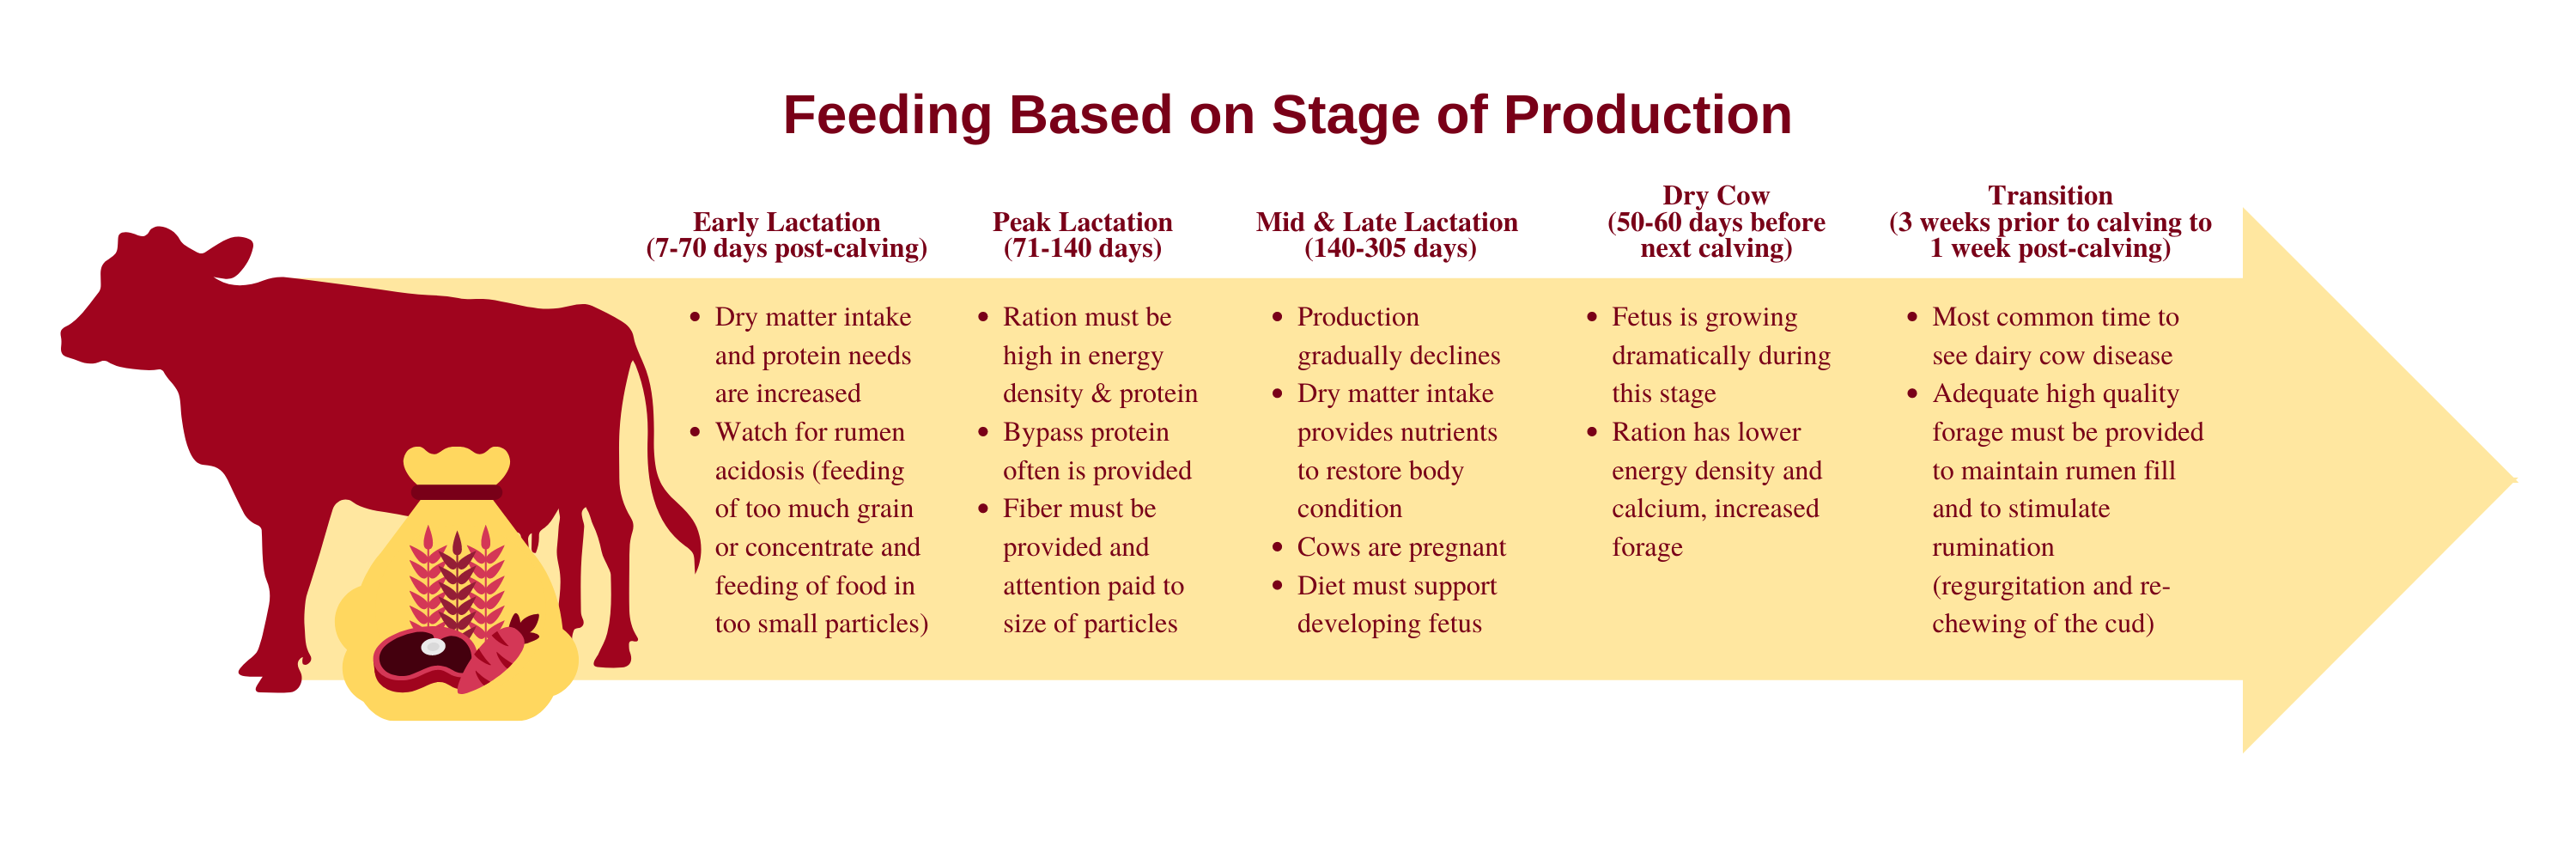 Feeding Based on Stage of Production Graphic